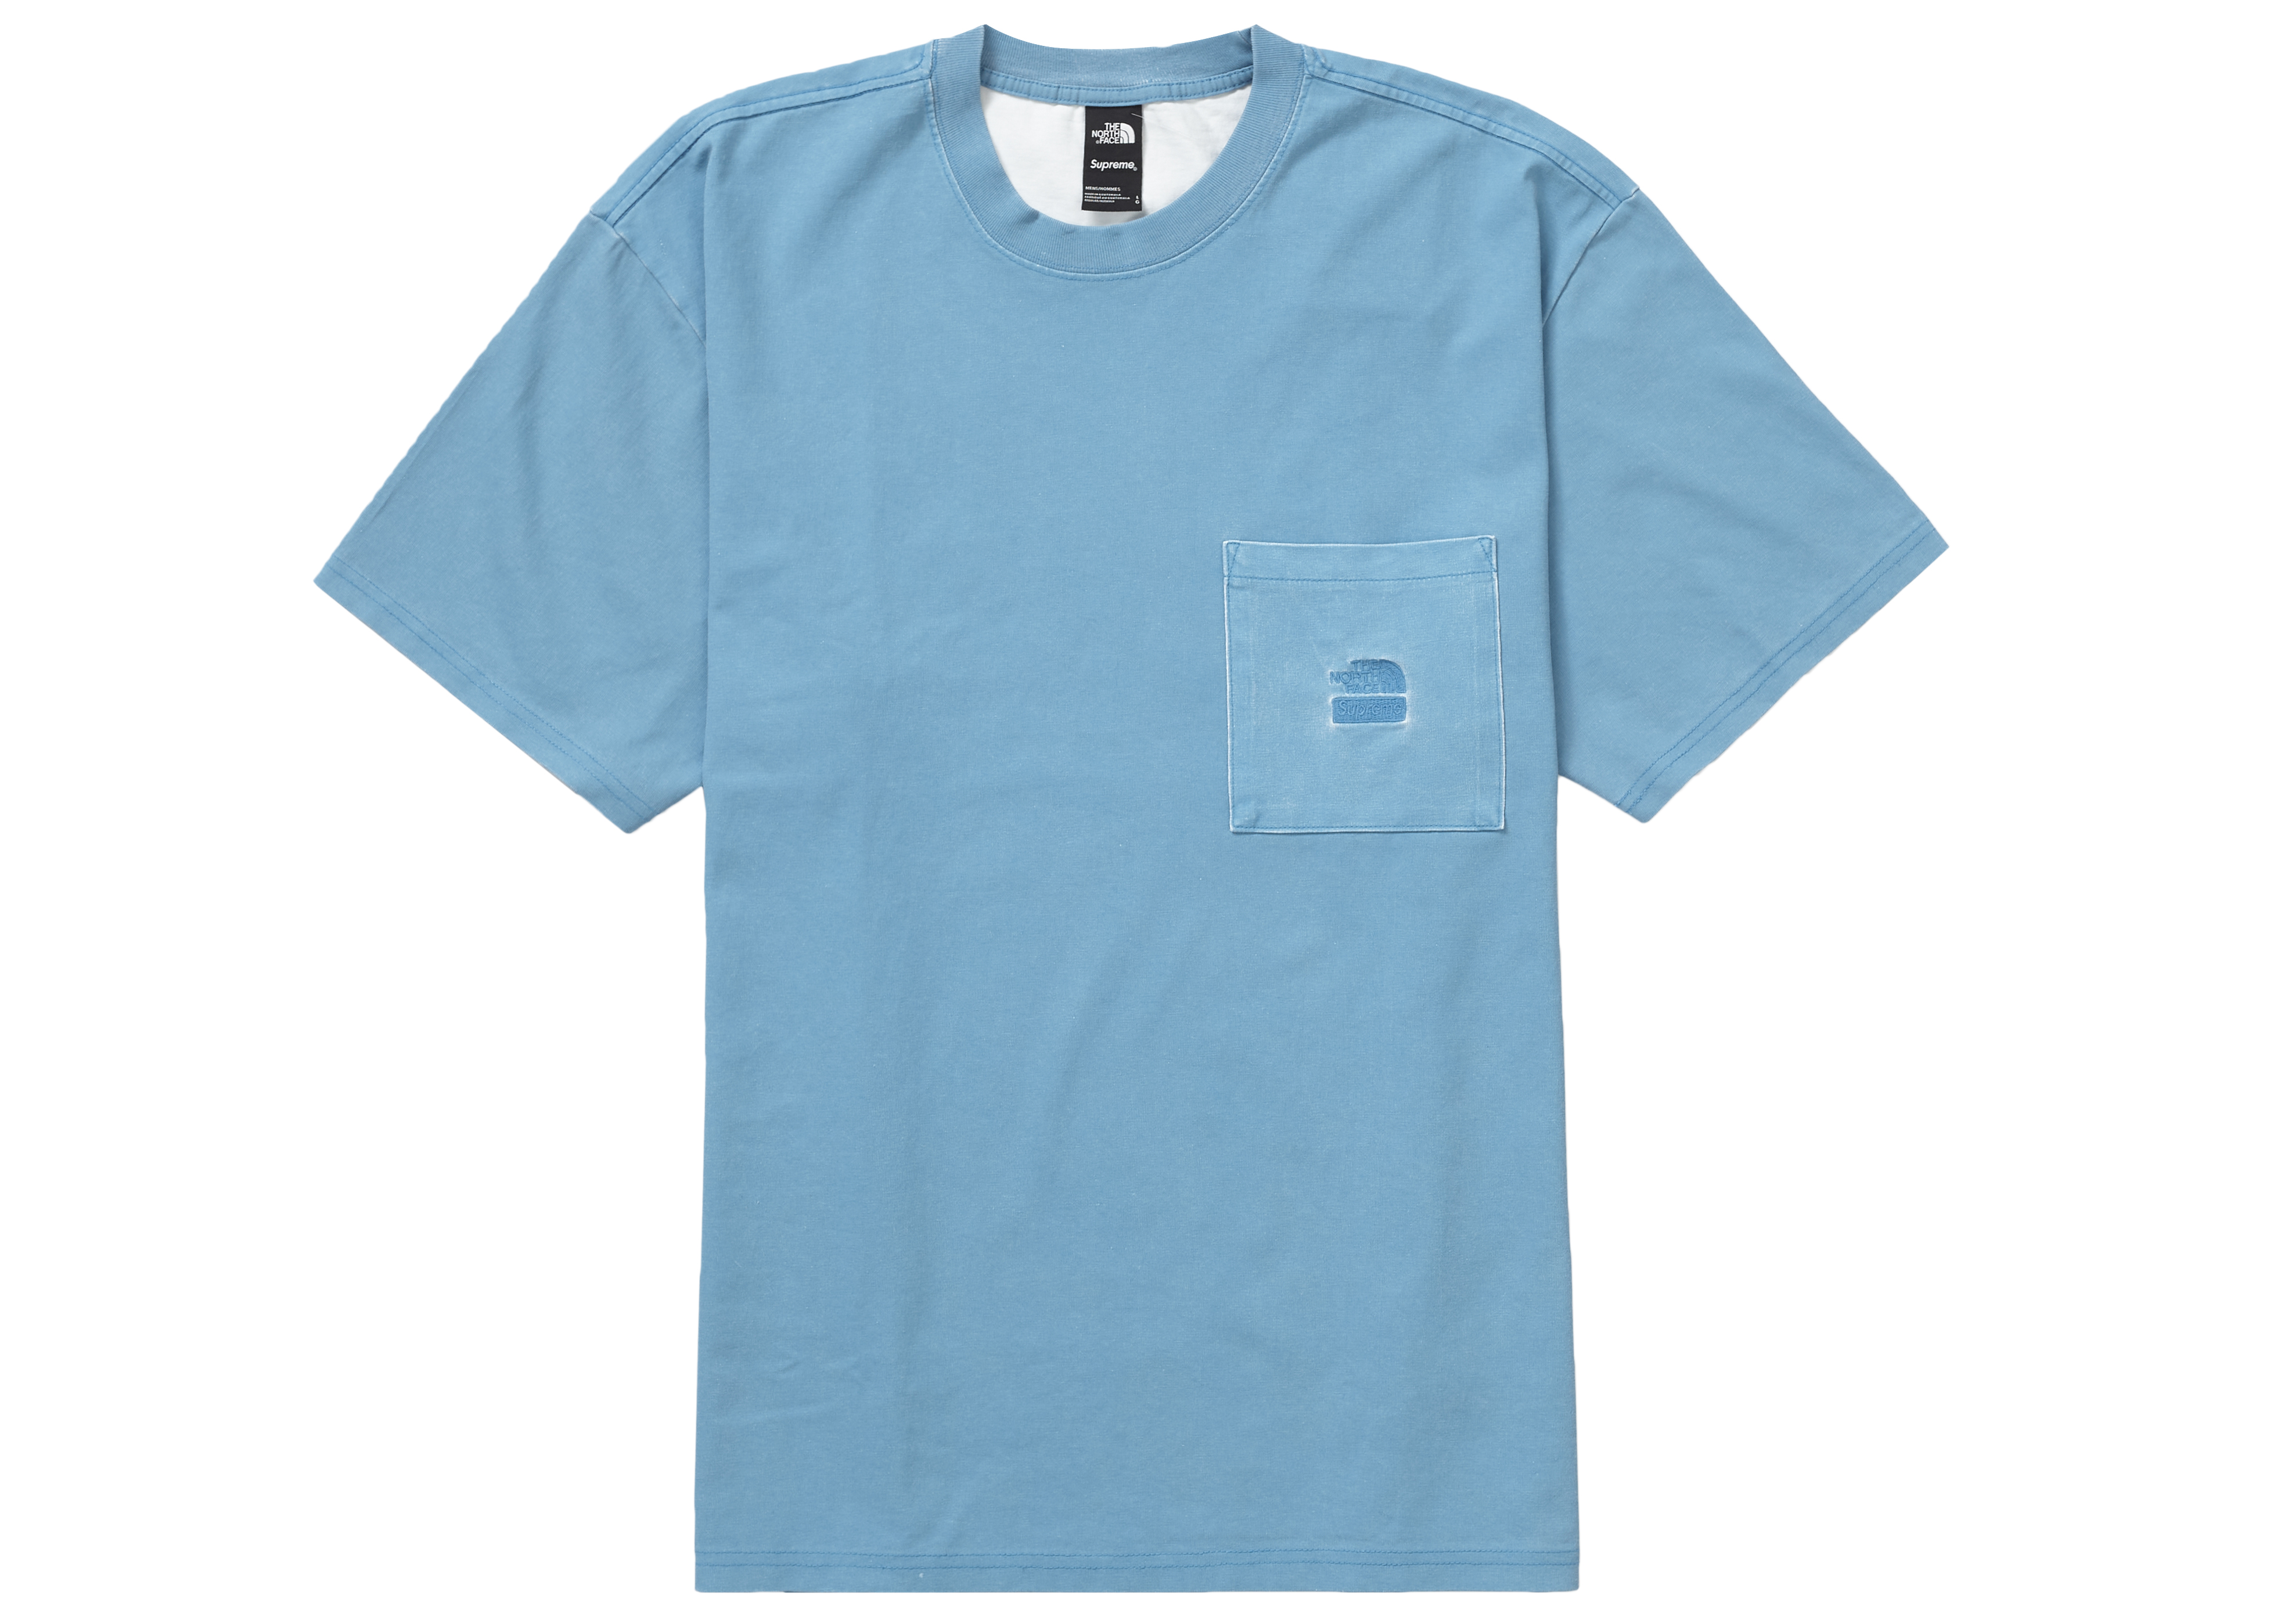 Supreme The North Face Pigment Printed Pocket Tee Turquoise Men's